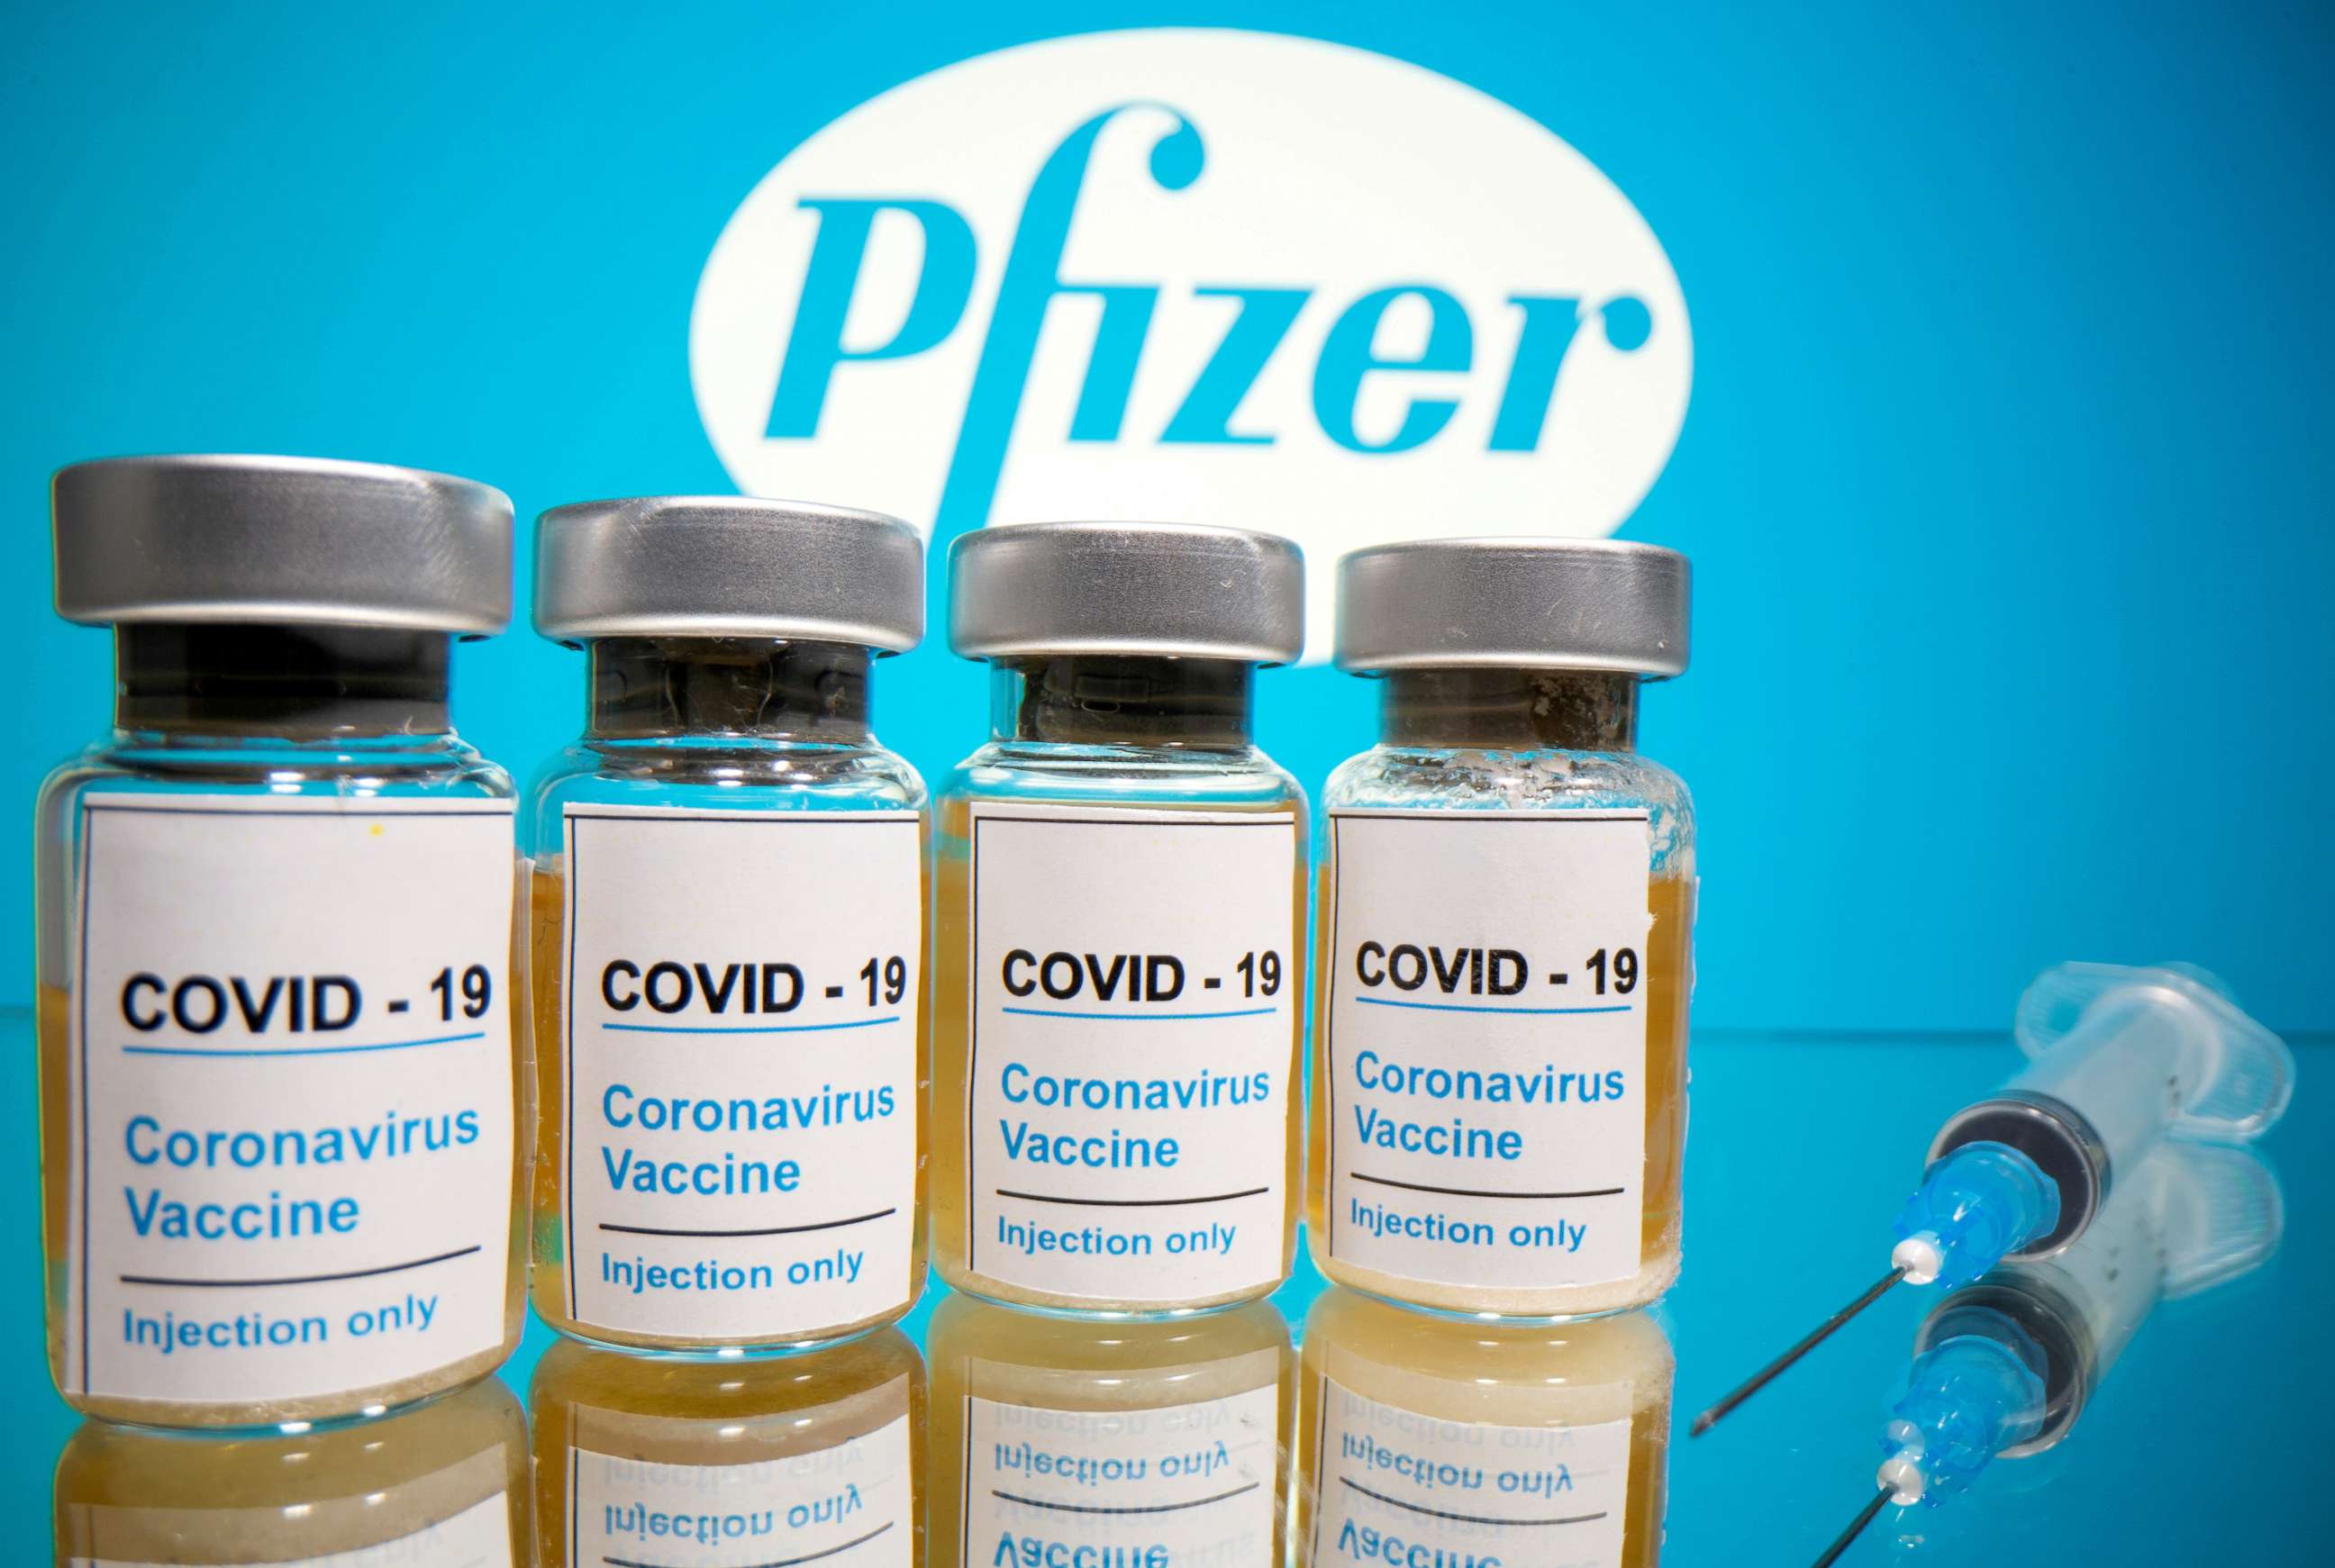 PHOTO: Potential COVID-19 vaccine vials from Pfizer, Oct. 31, 2020. 